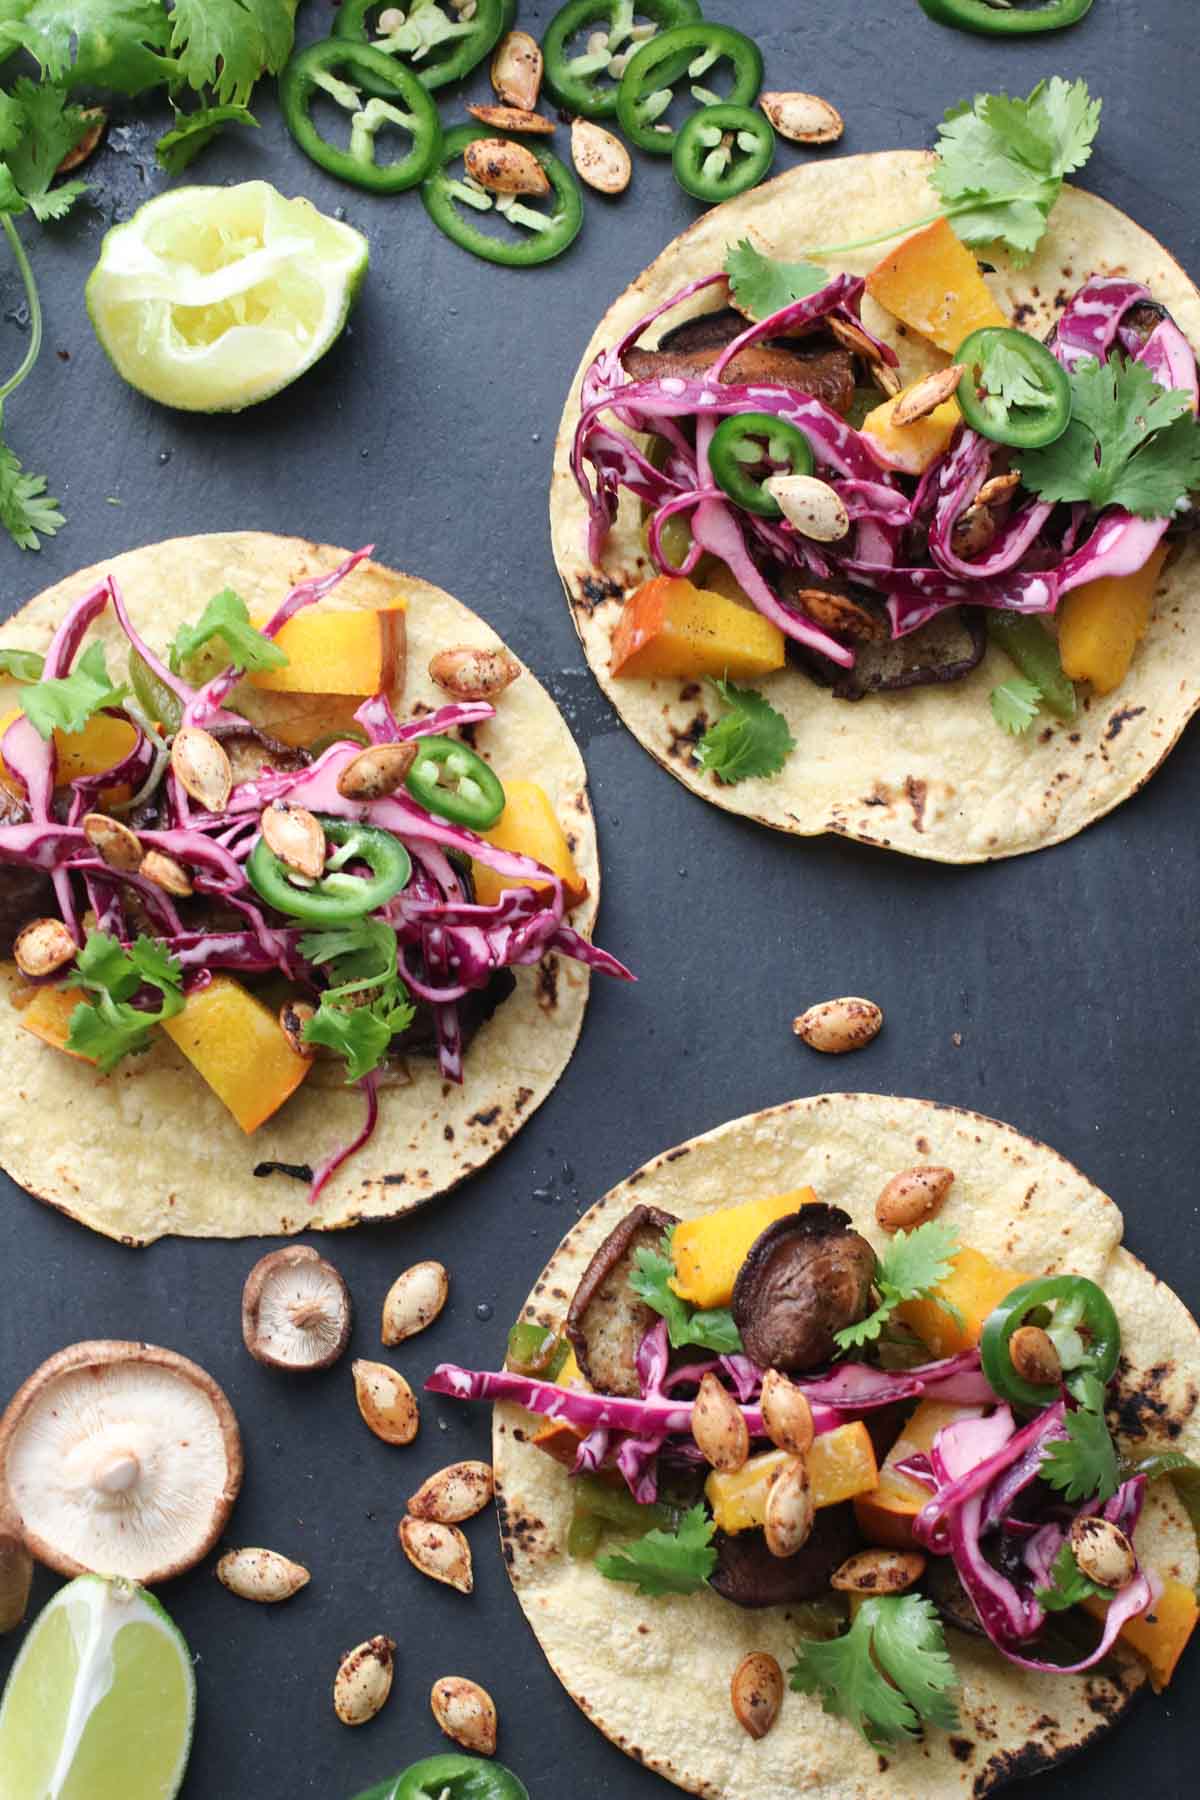 Vegan pumpkin shitake tacos combine creamy pumpkin and earthy shitake mushrooms with a crunchy-creamy lime slaw and perfectly spiced pumpkin seeds. This healthy recipe is done in 40 minutes flat! |abraskitchen.com